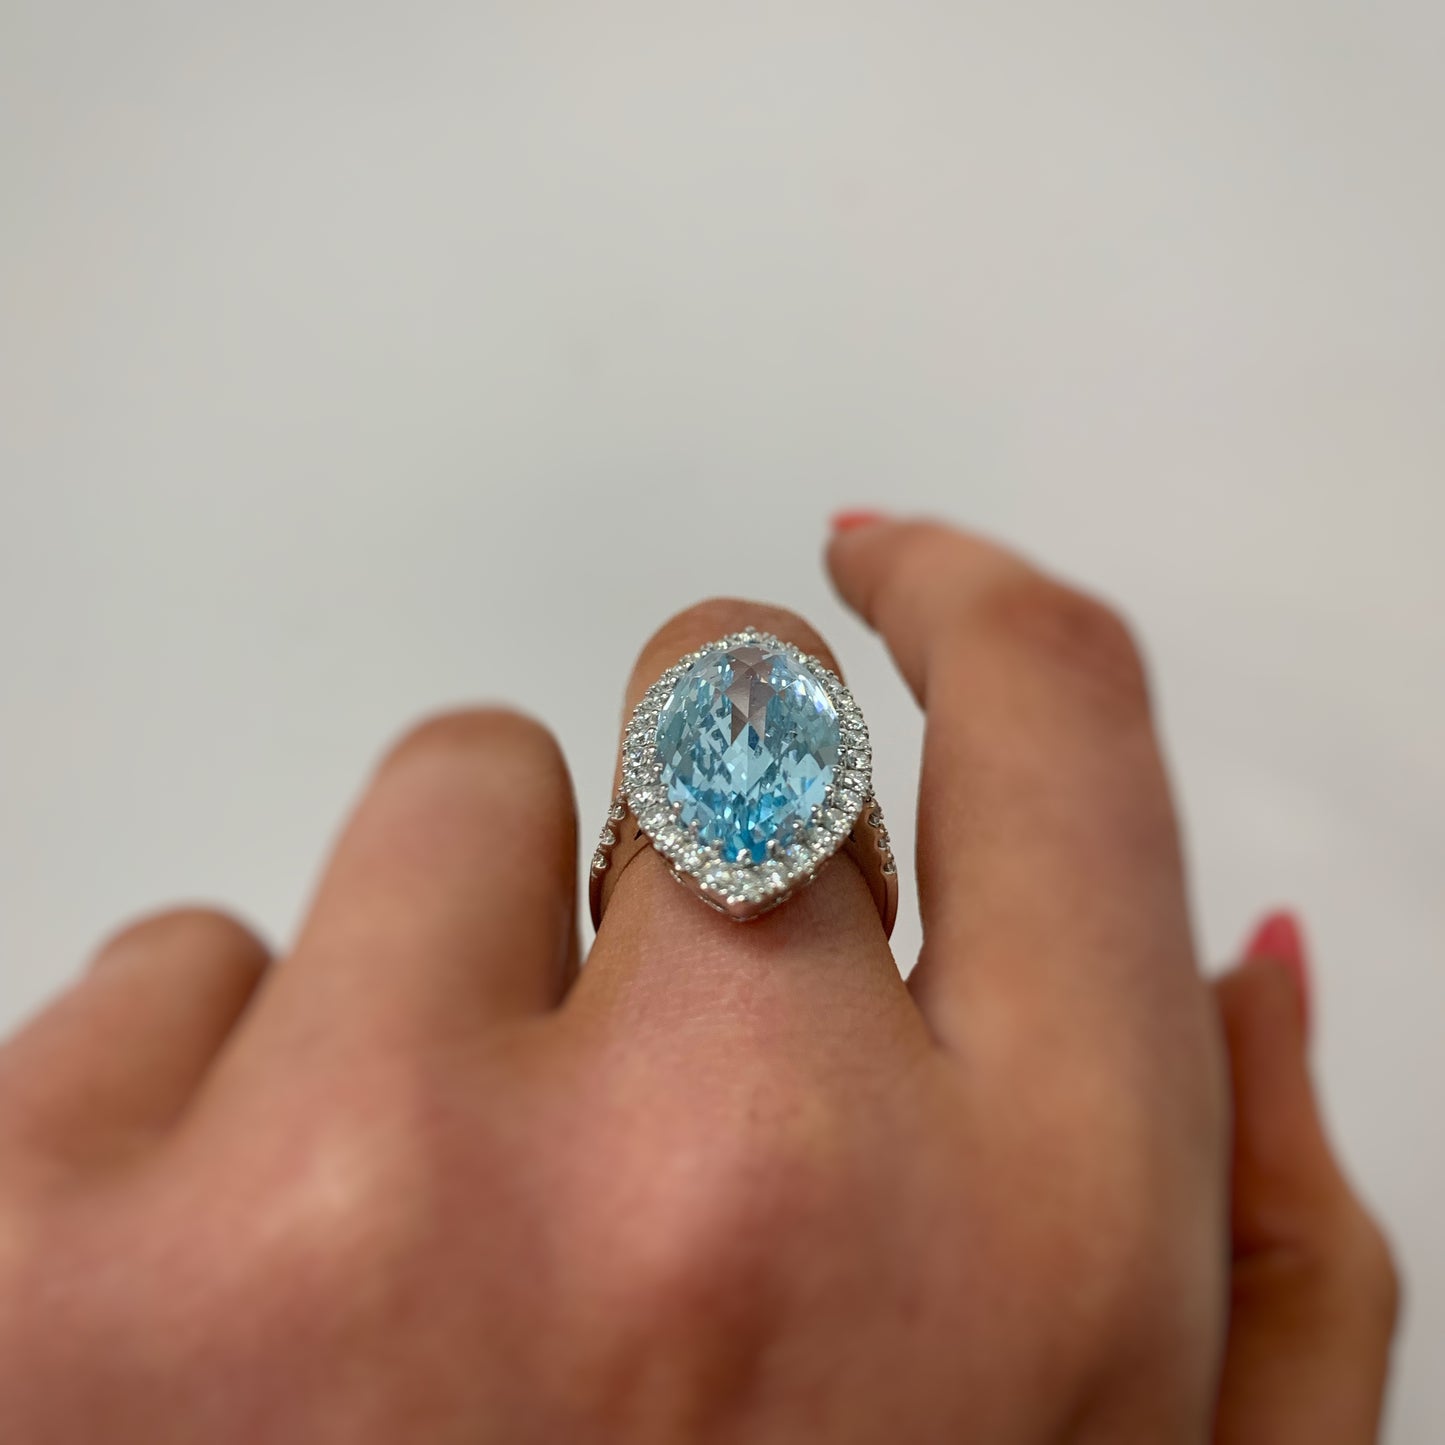 Magnificent 18ct White Gold Marquise Cut Blue Topaz & Diamond Cocktail Ring - SIZE M